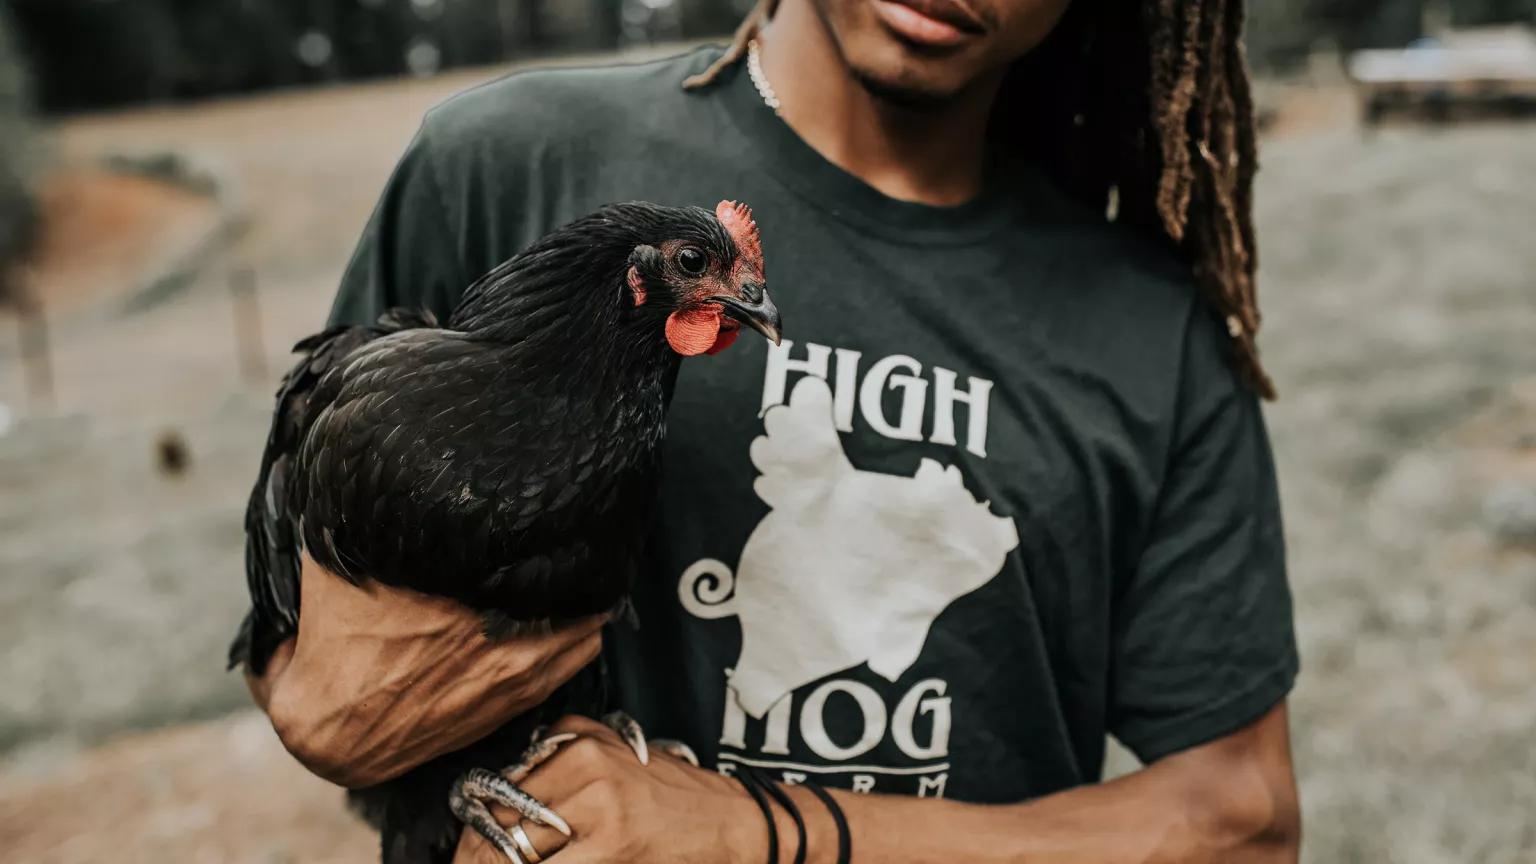 A man wearing a t-shirt with the words High Hog holds a rooster